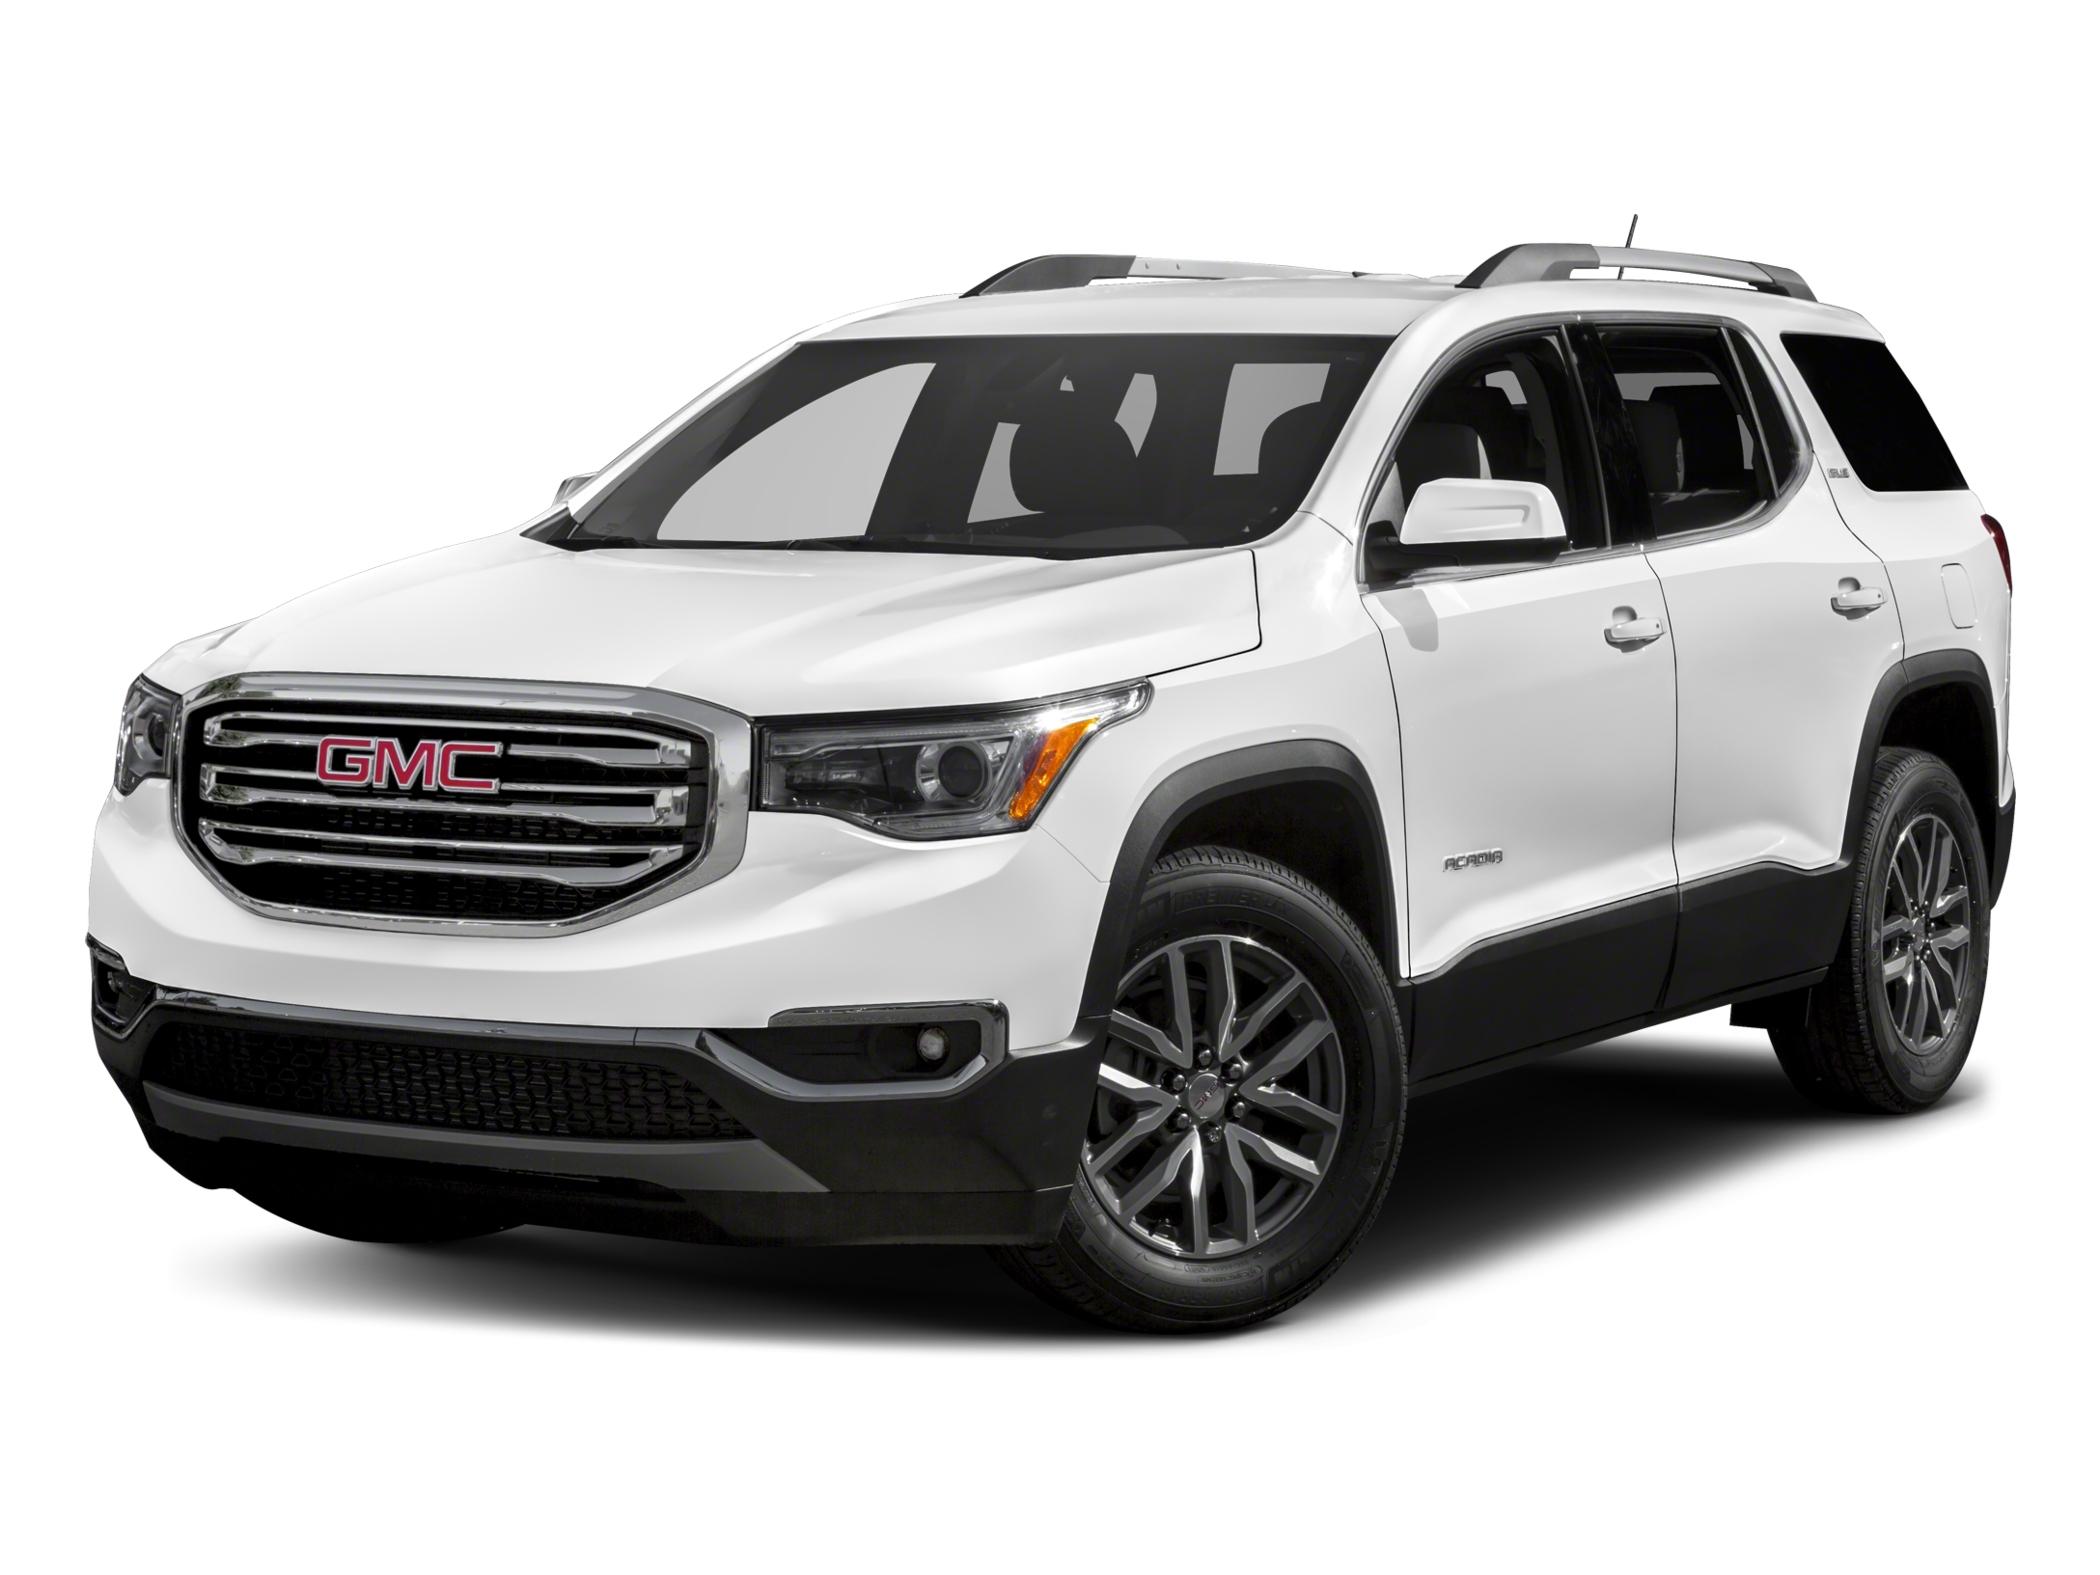 2018 GMC Acadia Reviews, Price, MPG and More | Capital One Auto Navigator